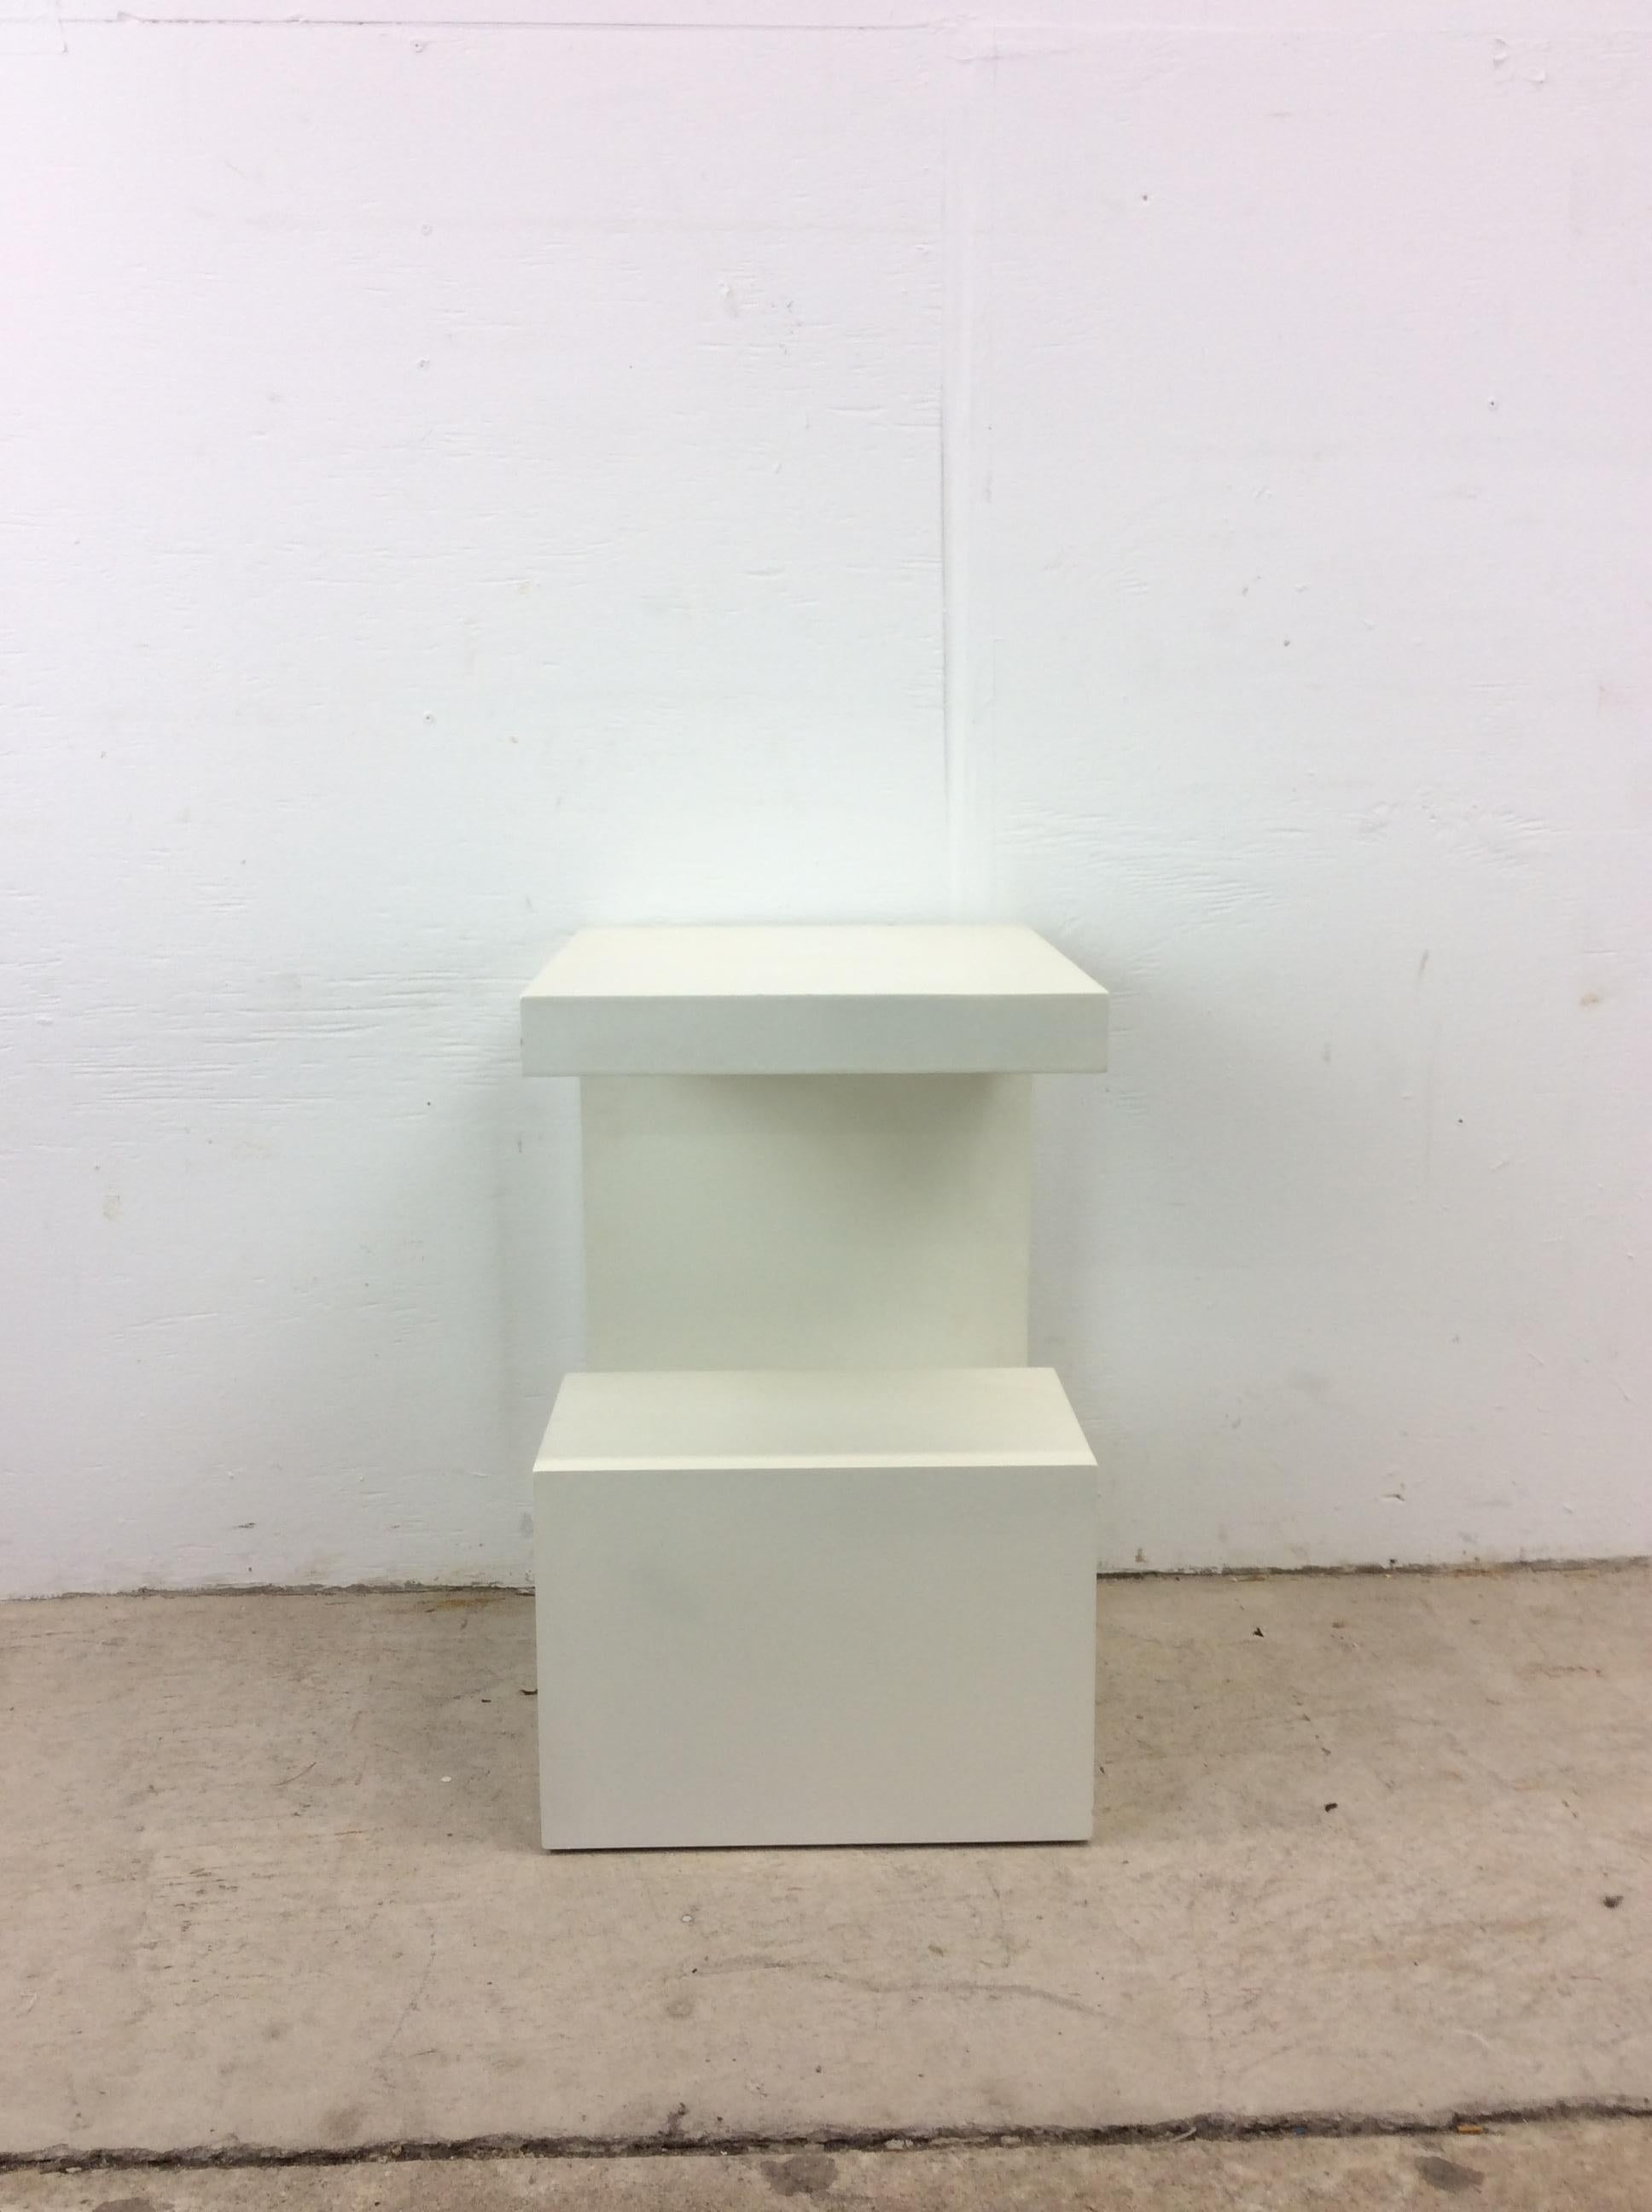 This post modern decorative pedestal features unique G shaped design offering multiple surfaces for displaying curios and a white lacquer finish. 

Complimentary white lacquer pedestal available separately.

Dimensions: 14w 16d 22h

Condition: